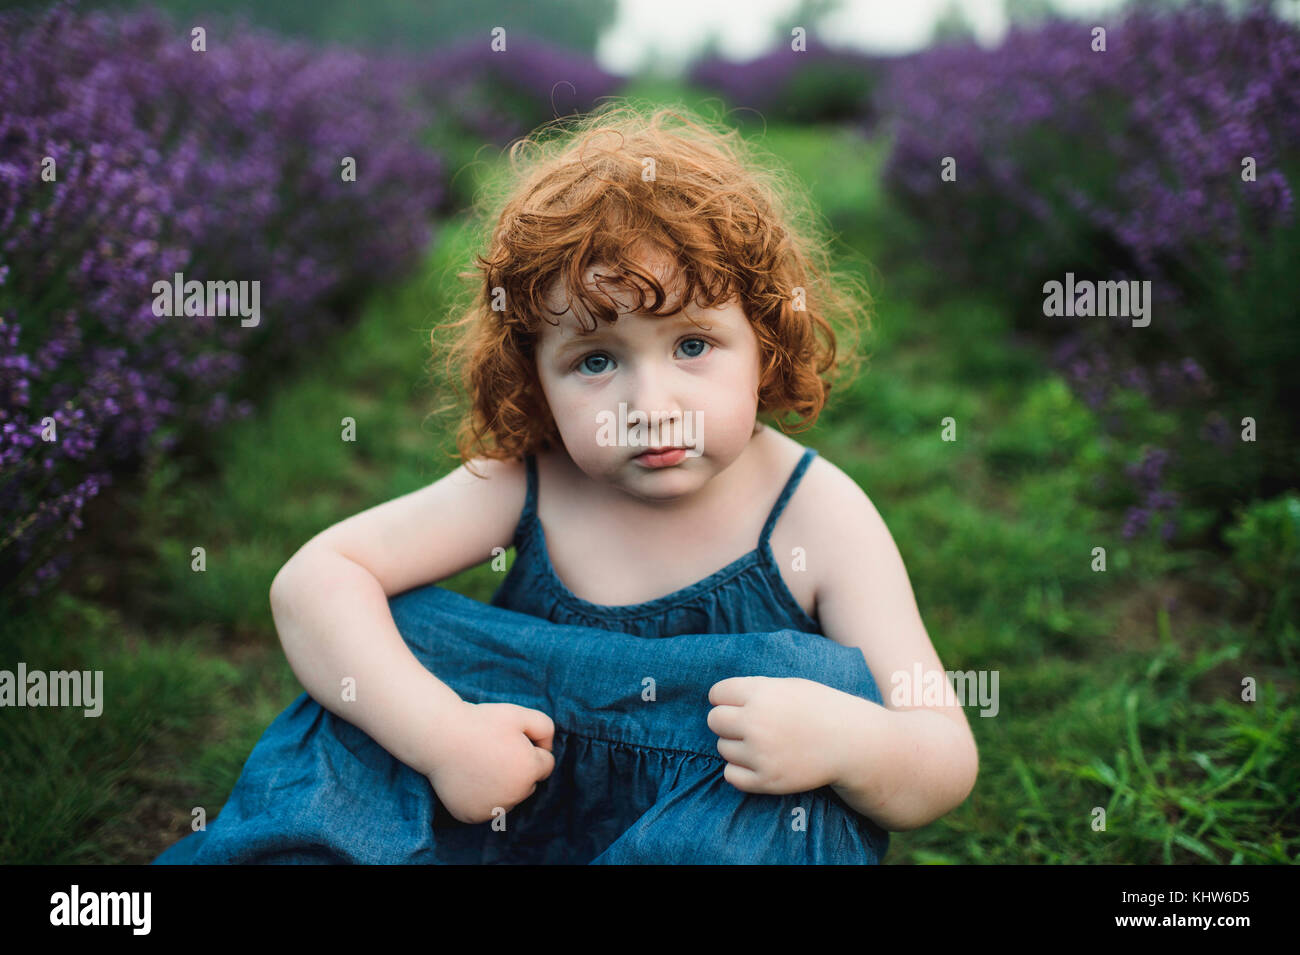 Toddler between rows of lavender, Campbellcroft, Canada Stock Photo